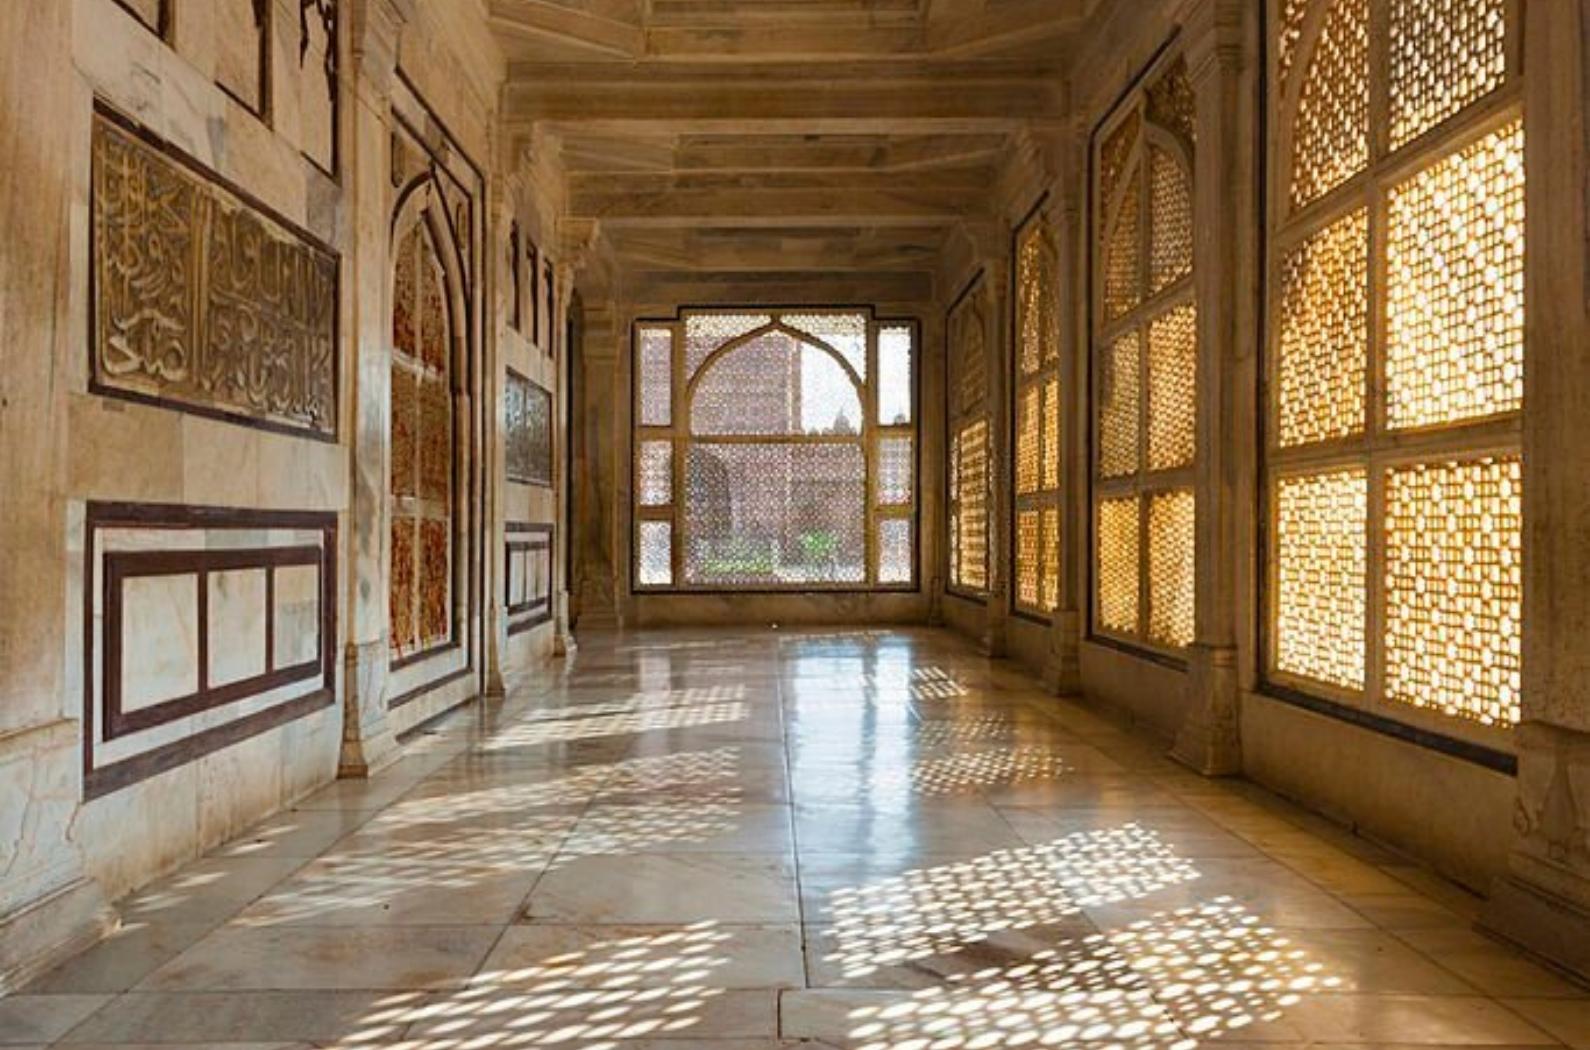 A hallway with beautiful intricate lattice windows in the central white marble tomb of Salim Chishti in the main courtyard at Fatehpur Sikri in Agra, India